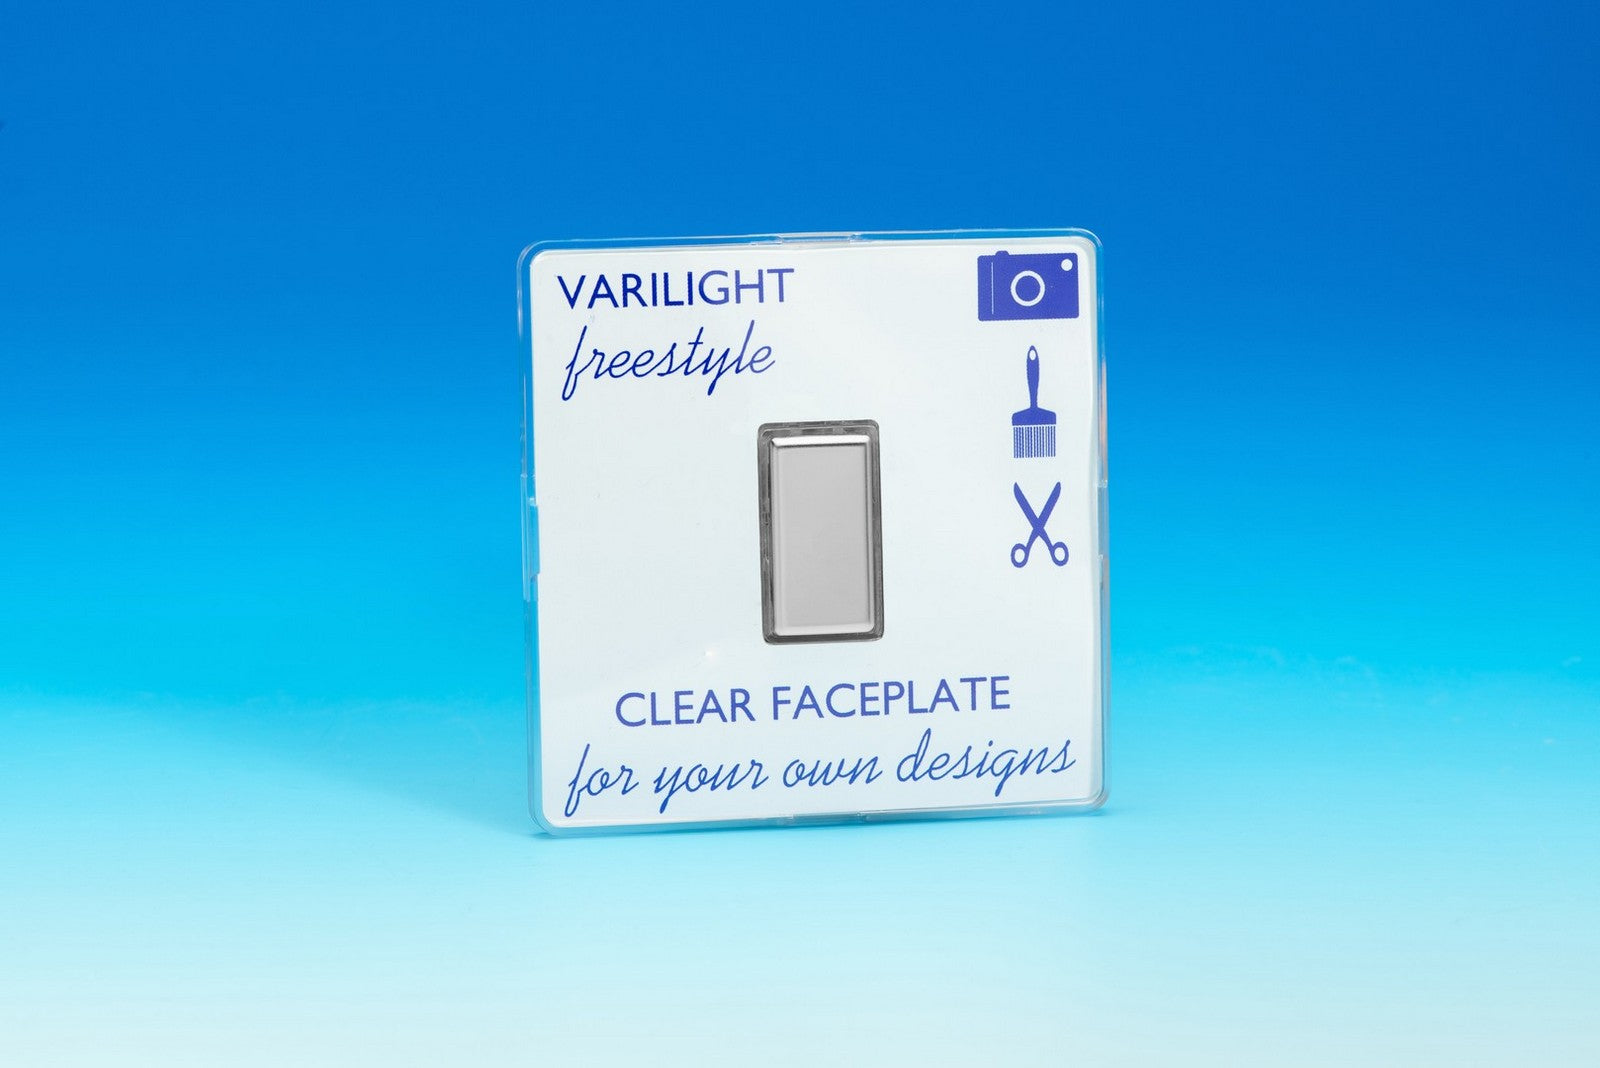 Varilight JIFES001C Freestyle Clear 1-Gang Tactile Touch Control Dimming Slave for use with Multi-Point Touch or Remote Master on 2-Way Circuits